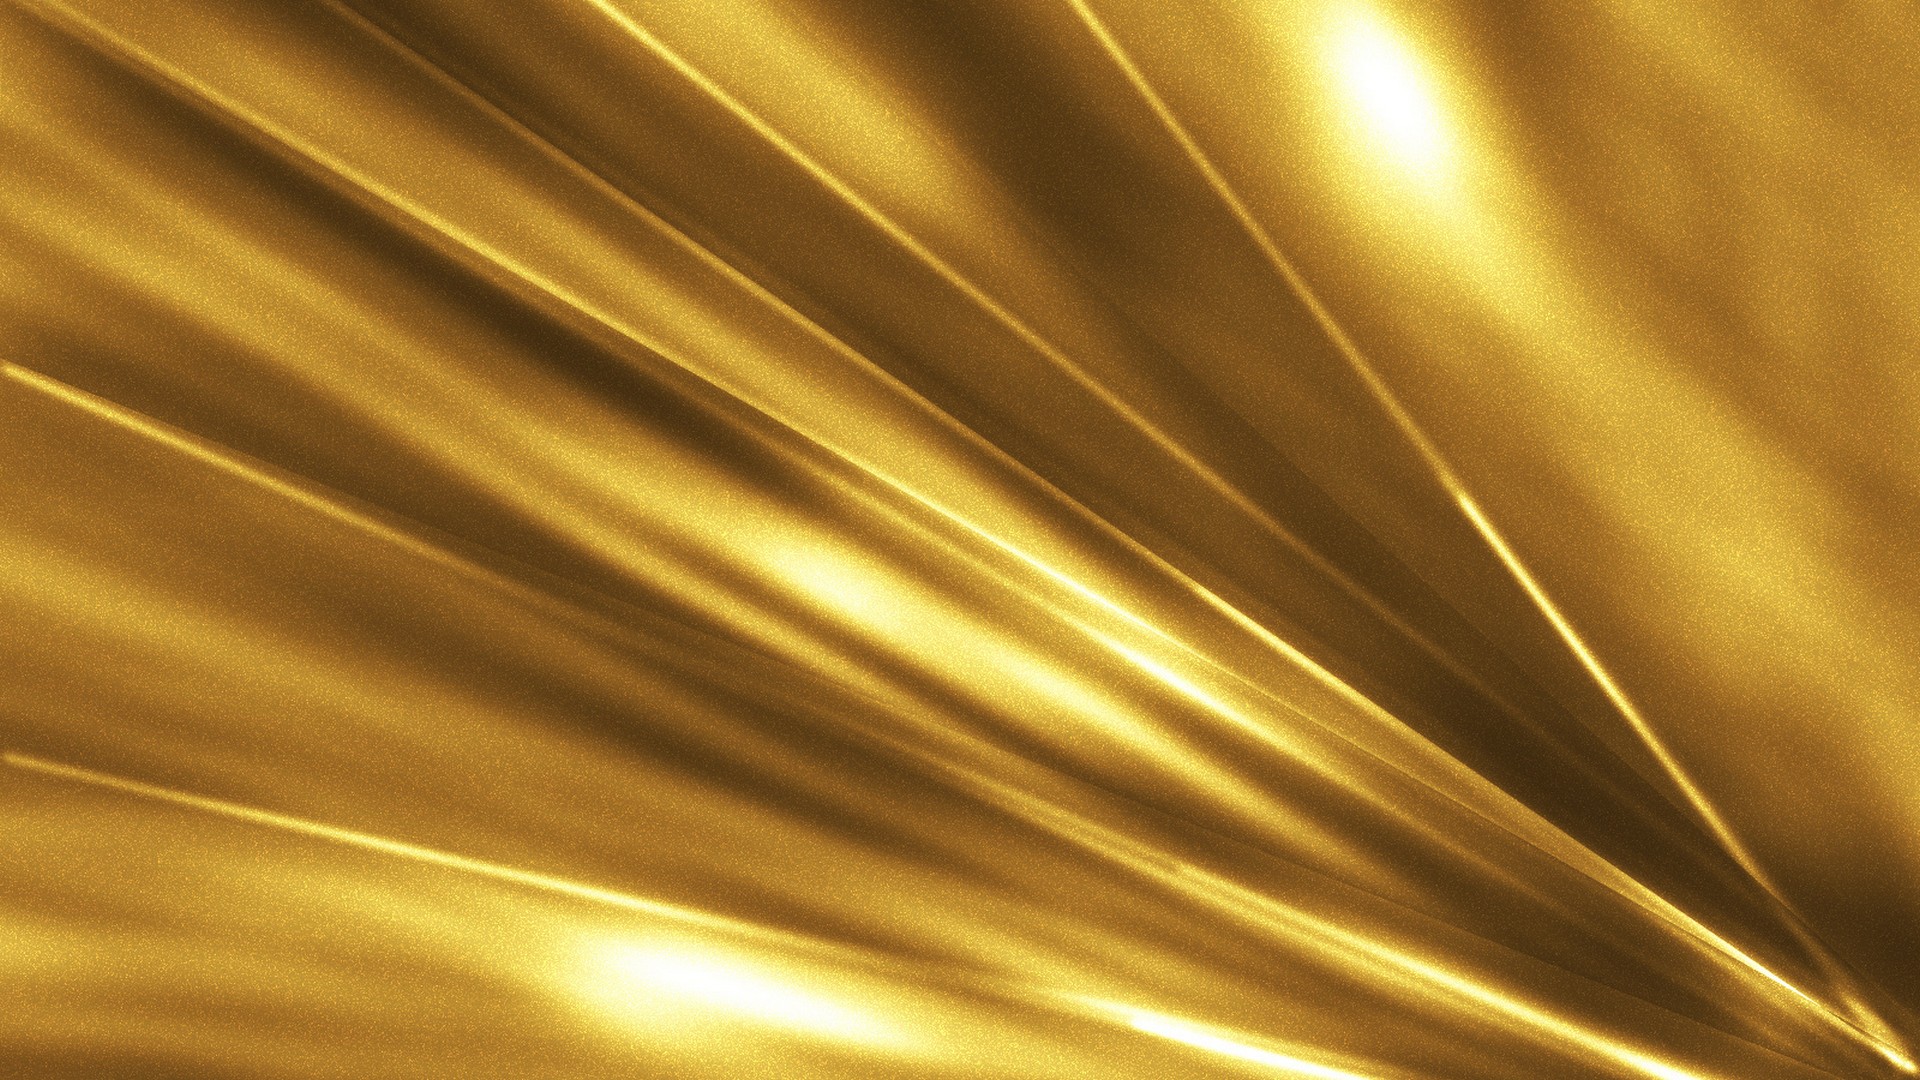 HD Gold Backgrounds Resolution 1920x1080